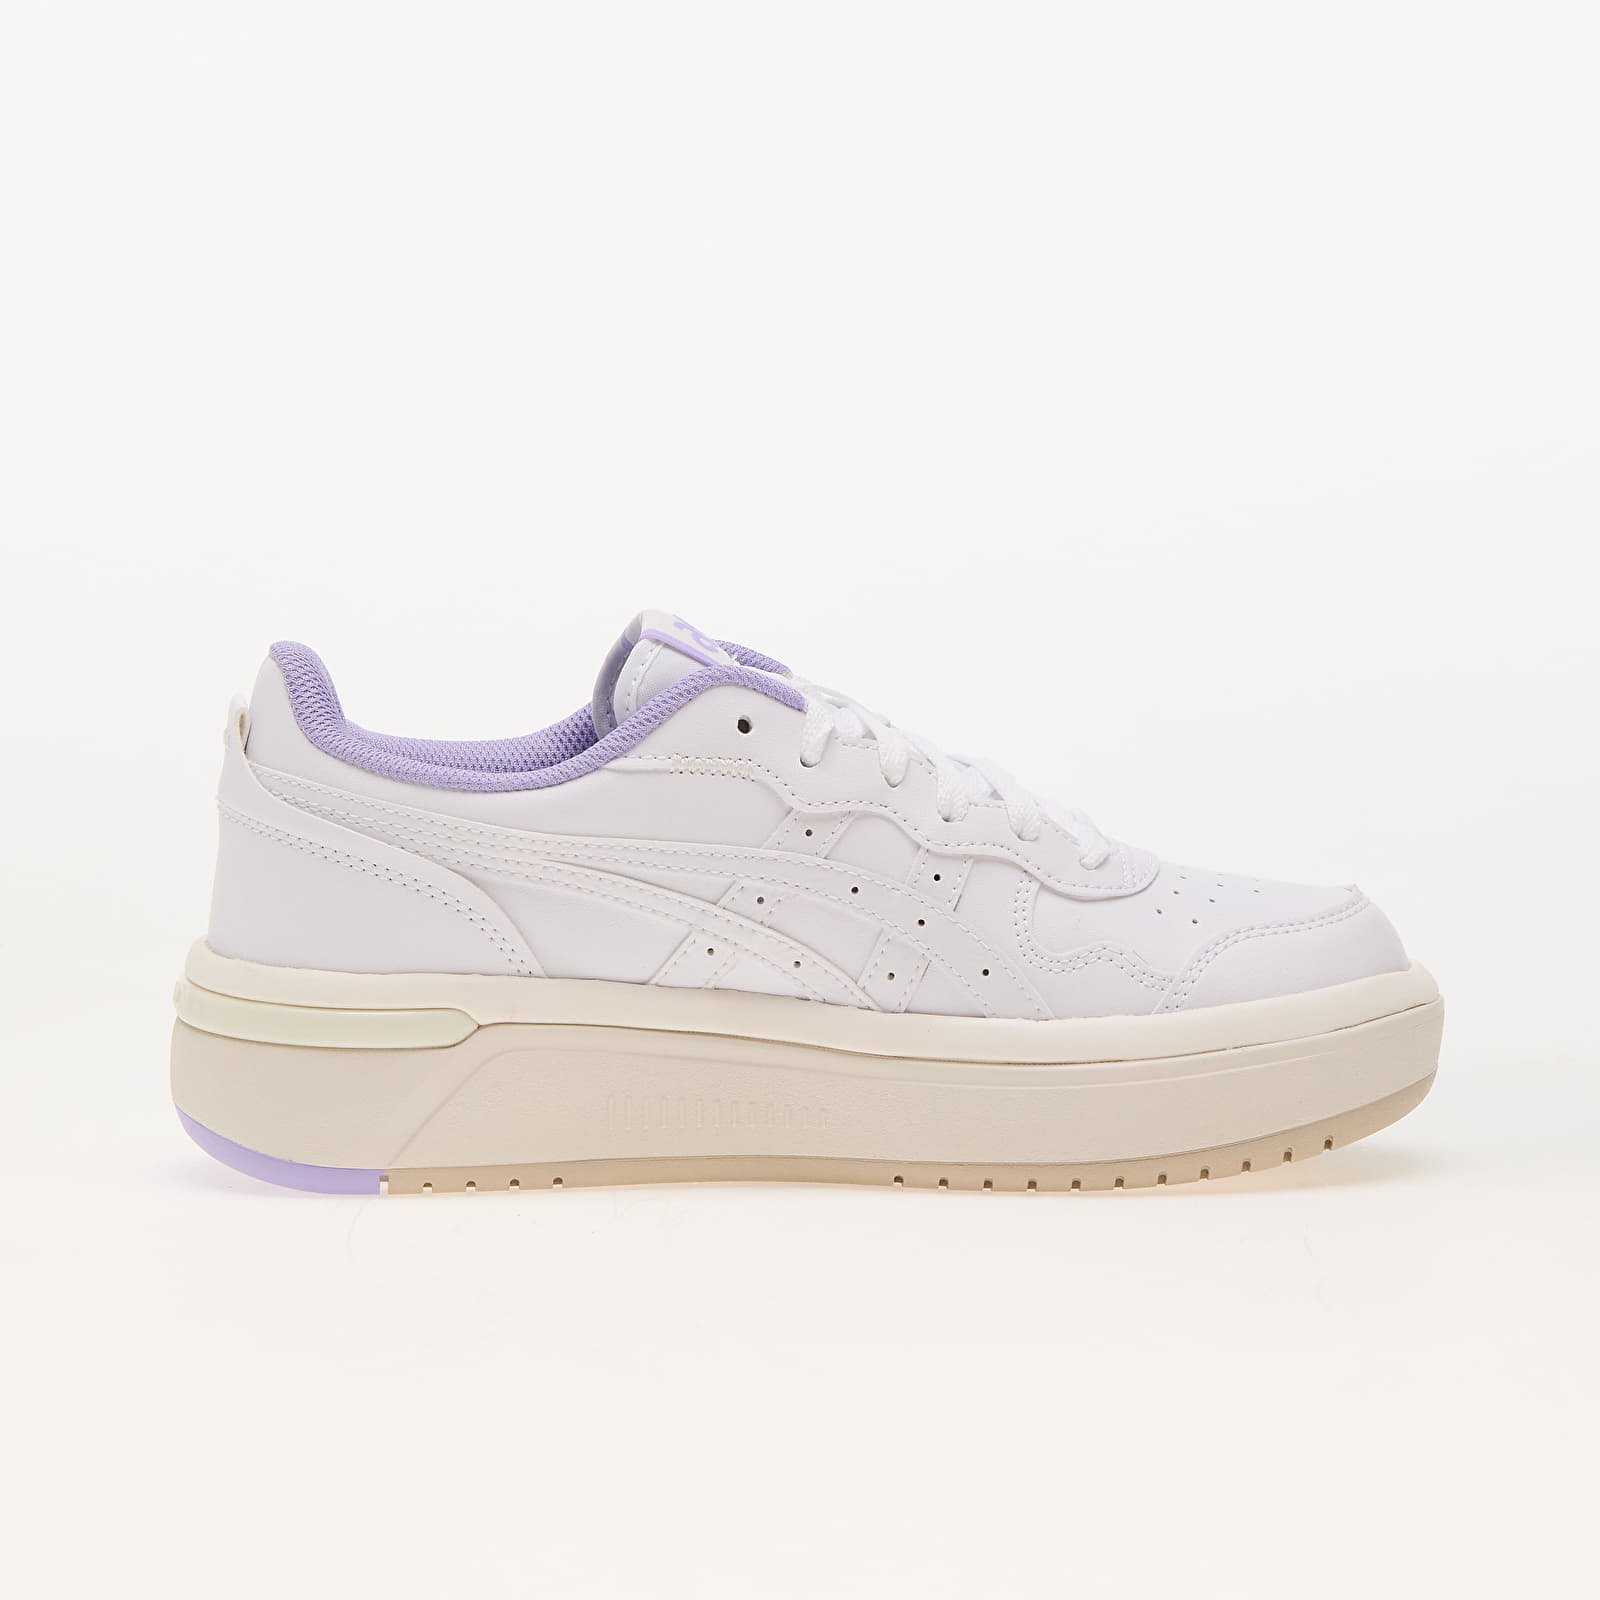 Japan S St White, Low-top sneakers